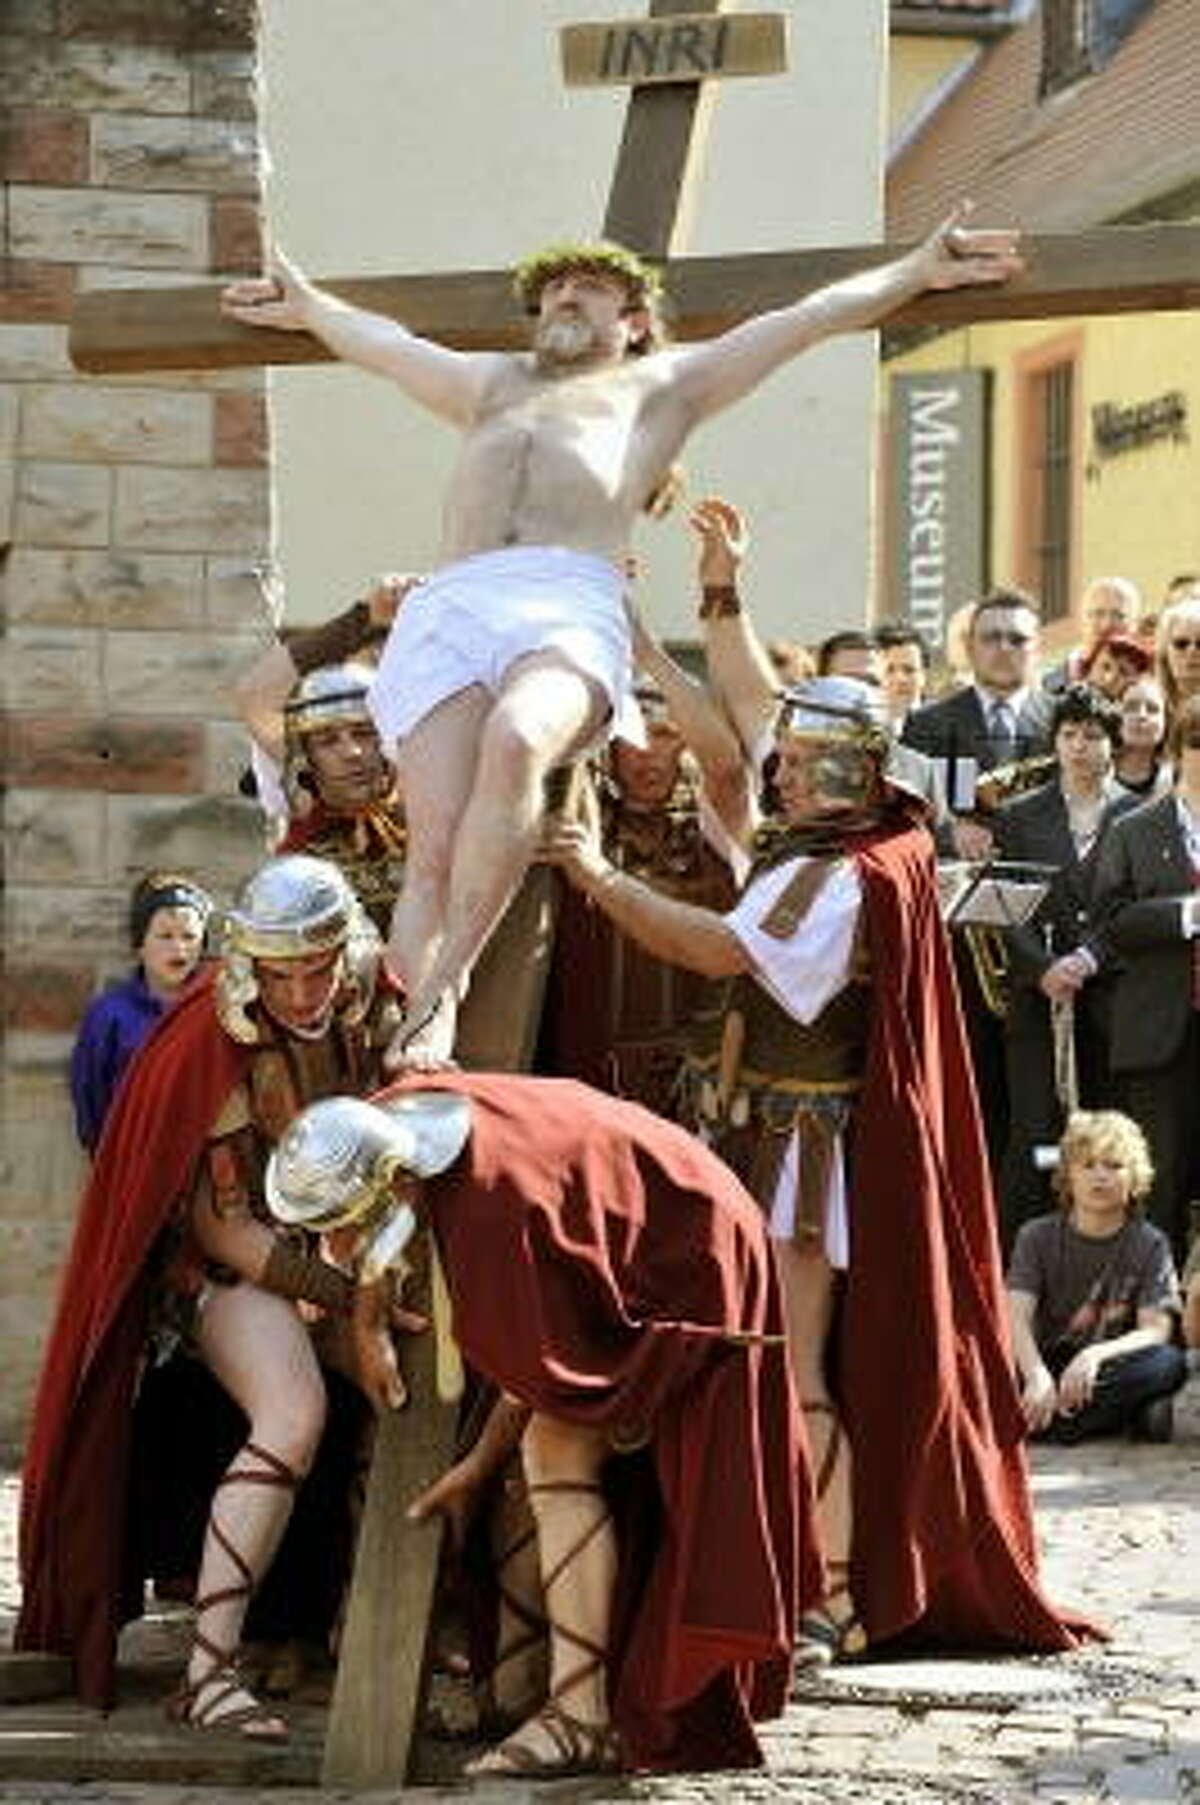 Hartmuth Lux in the role of Jesus and other lay actors perform the Stations of the Cross during the Good Friday procession on April 10, 2009 in Bensheim in western Germany. Thousands of believers flocked the roads of the village to attend the passion play.